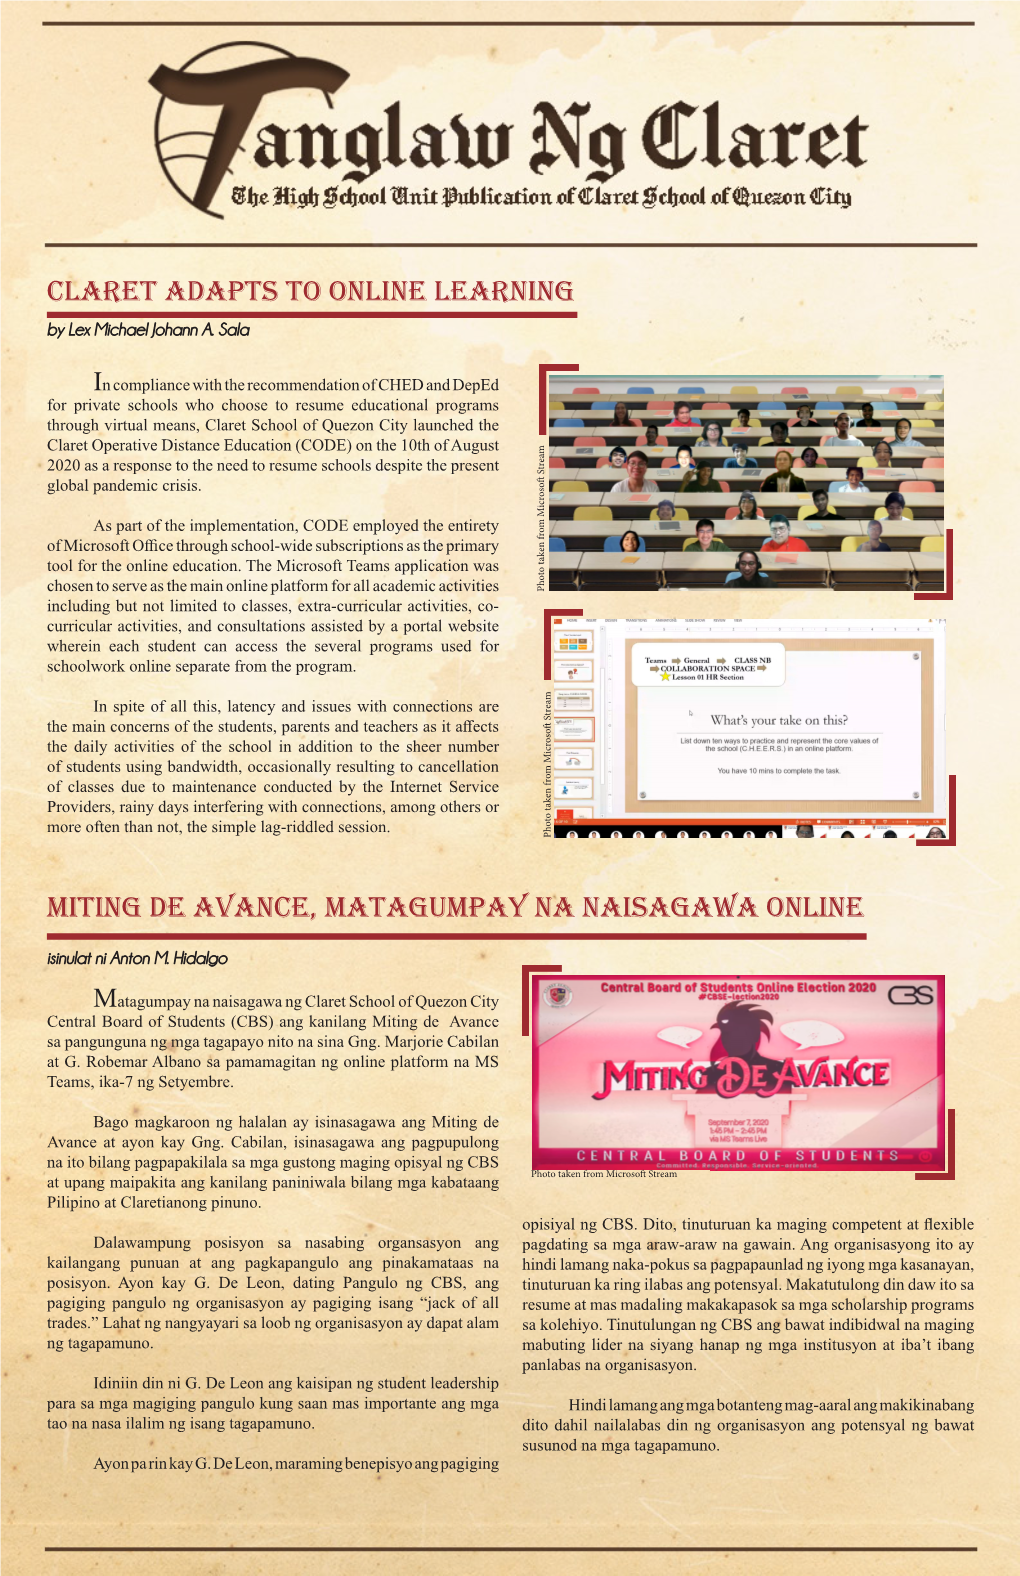 Claret Adapts to Online Learning Miting De Avance, Matagumpay Na